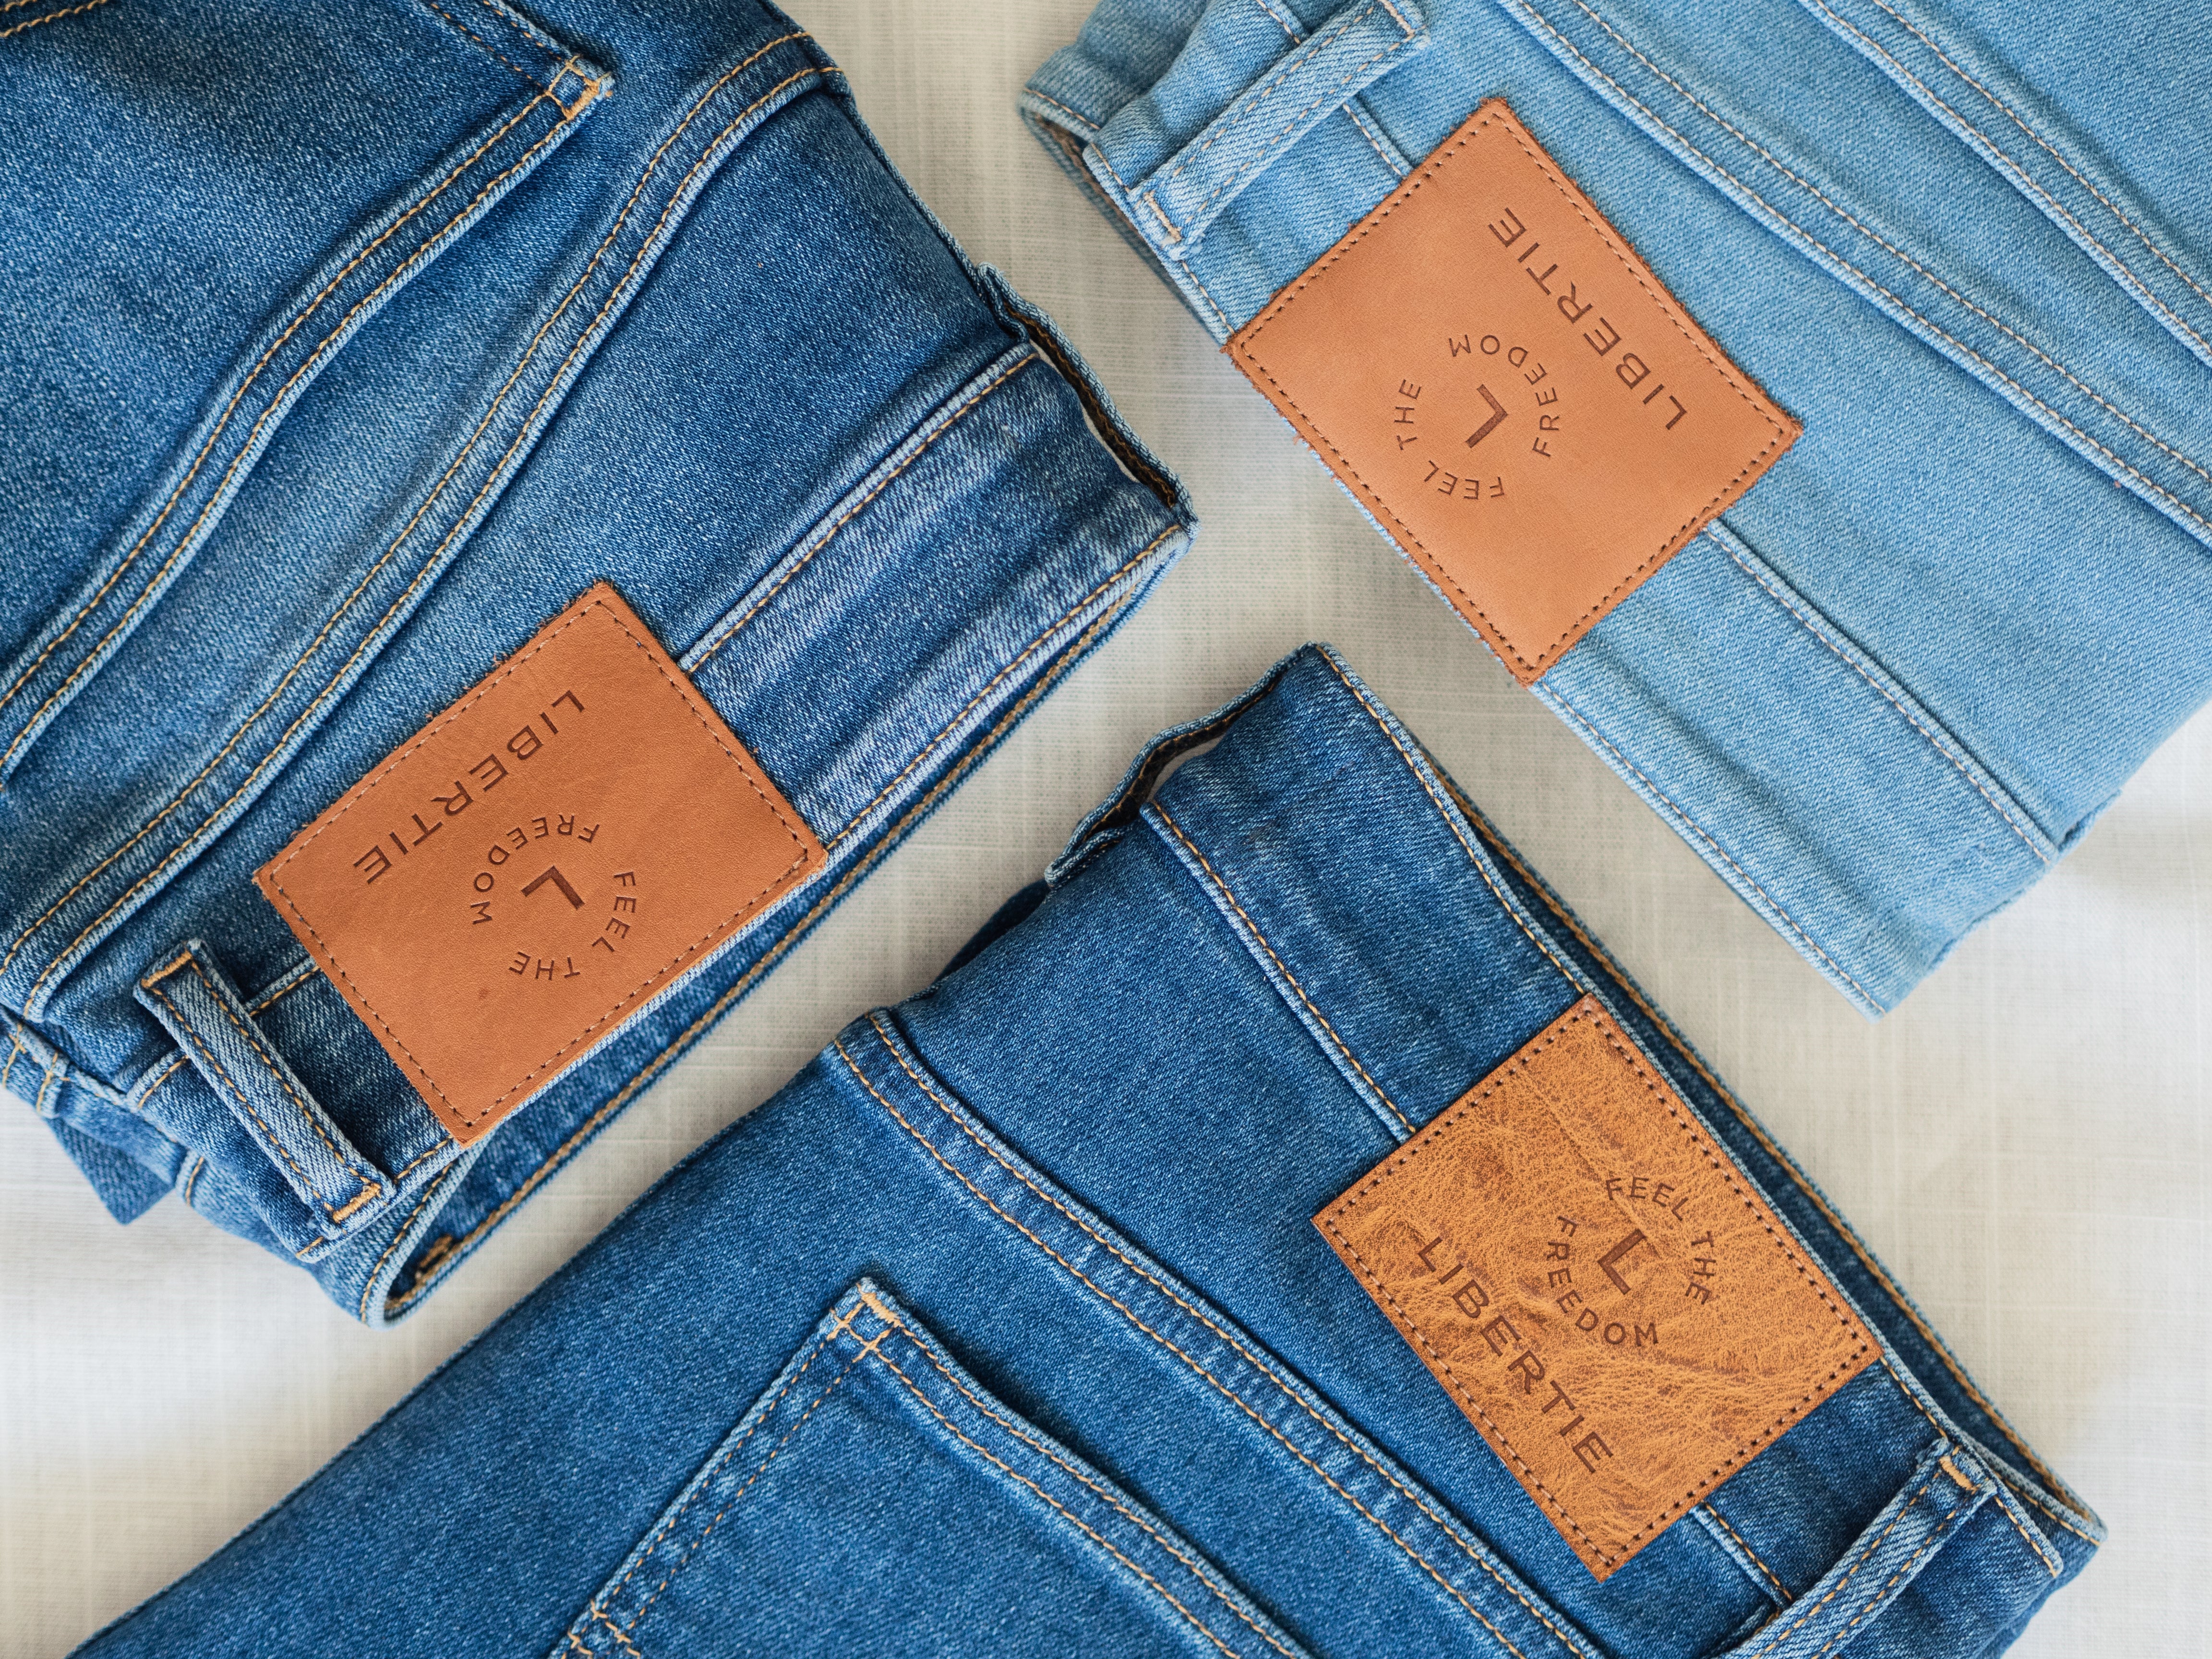 Jeans Washes & Surface treatments (12 important types) - SewGuide